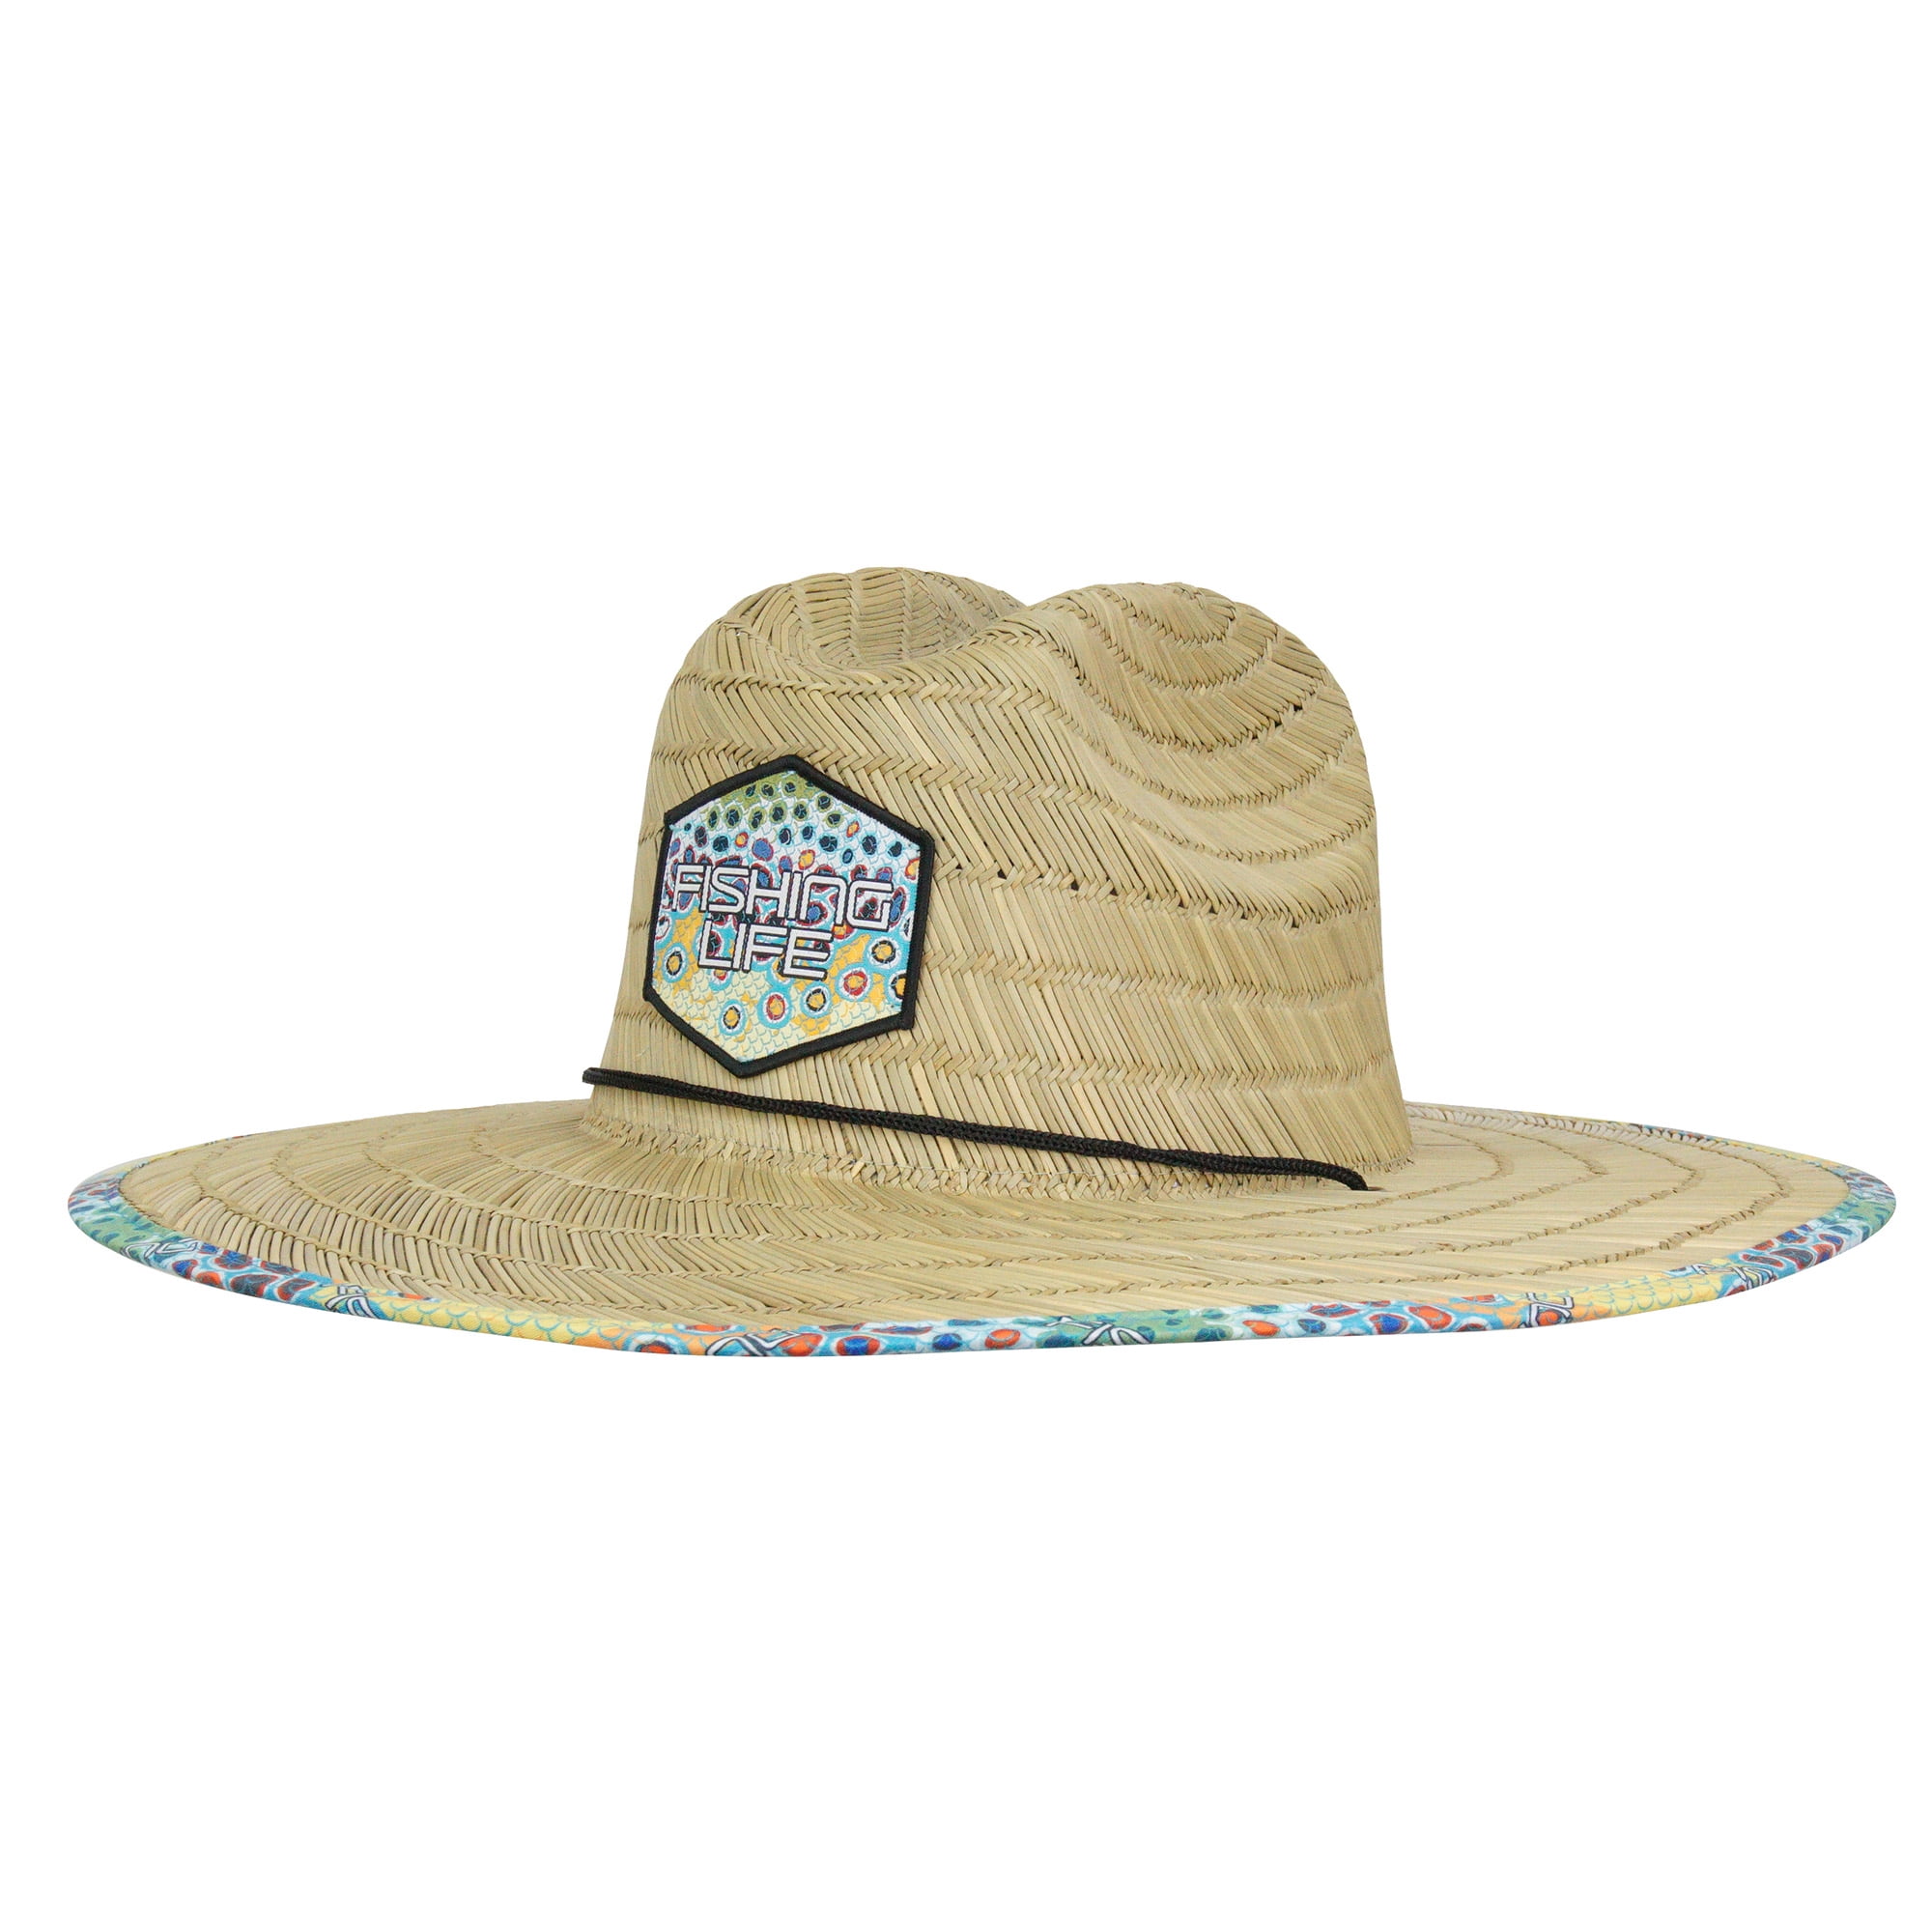 Fishing_life Fishing Life Trout Scales Lifeguard Hat - Straw, adult Unisex, Size: One size, Multicolor